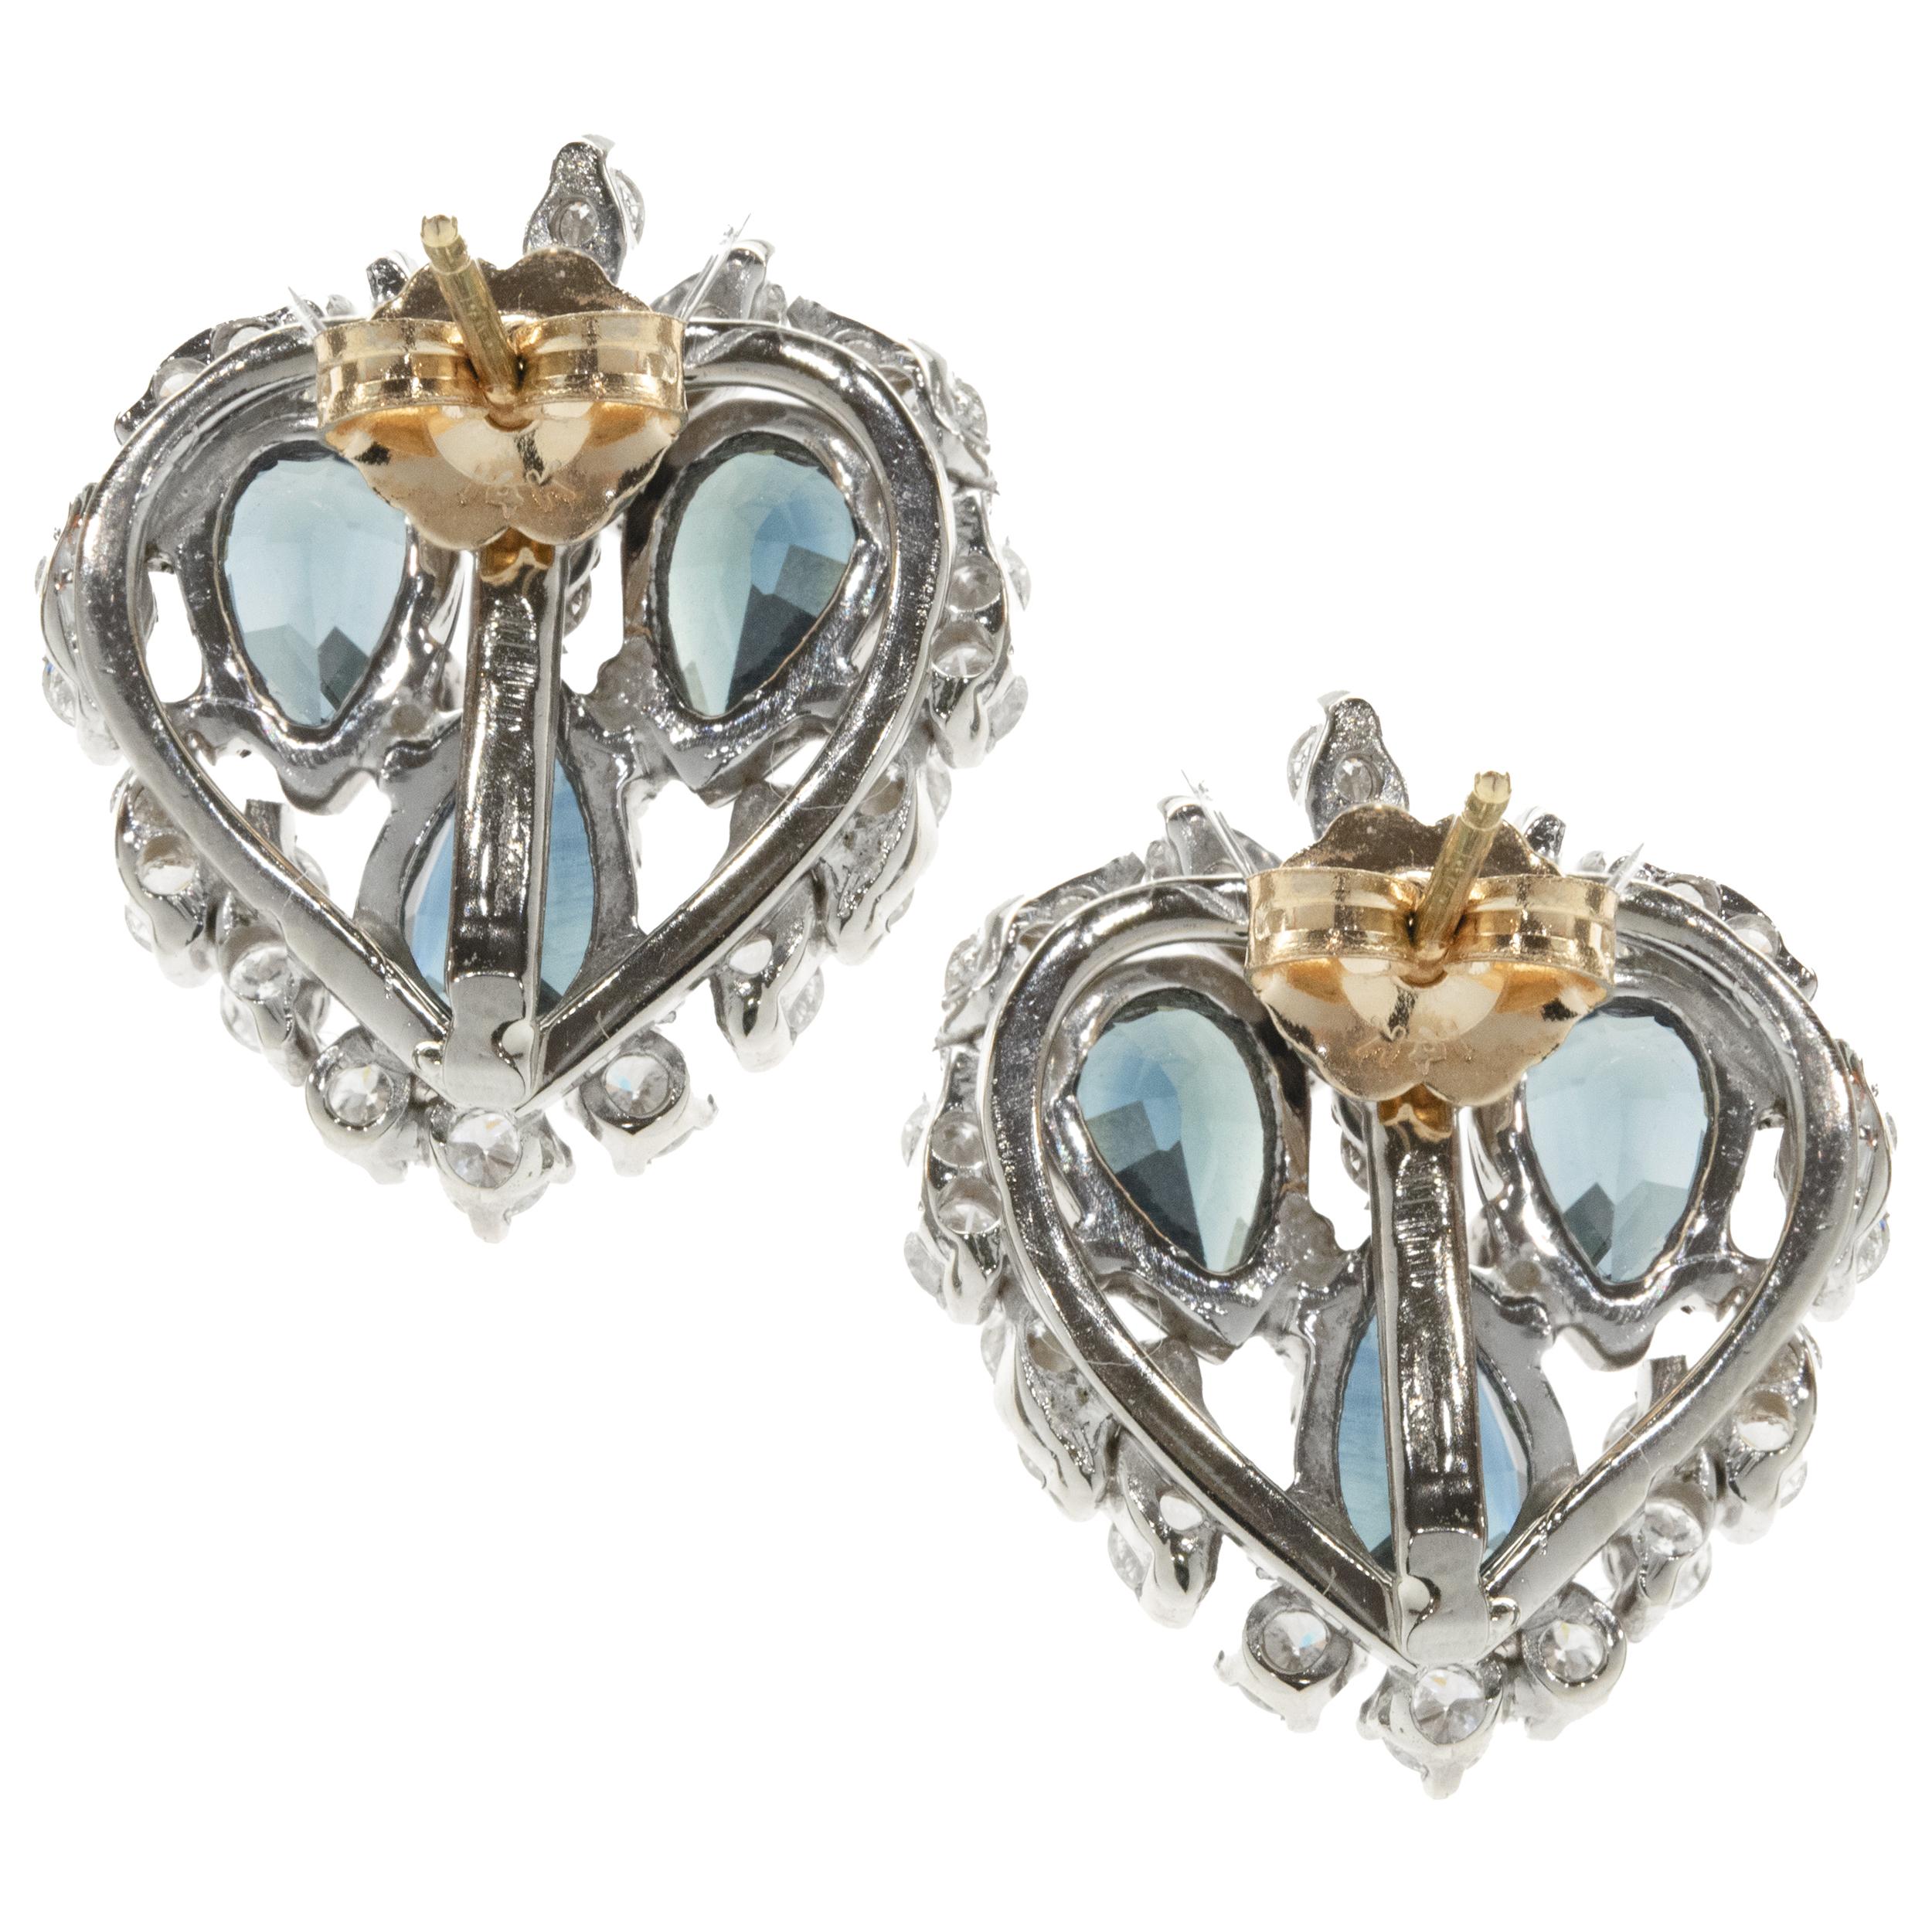 Designer: custom
Material: 14K white gold
Diamond: 54 round brilliant cut = 1.62cttw
Color: G
Clarity: SI1
Dimensions: earrings measure 19.70 x 18.17mm 
Fastenings: friction backs
Weight: 7.44 grams
